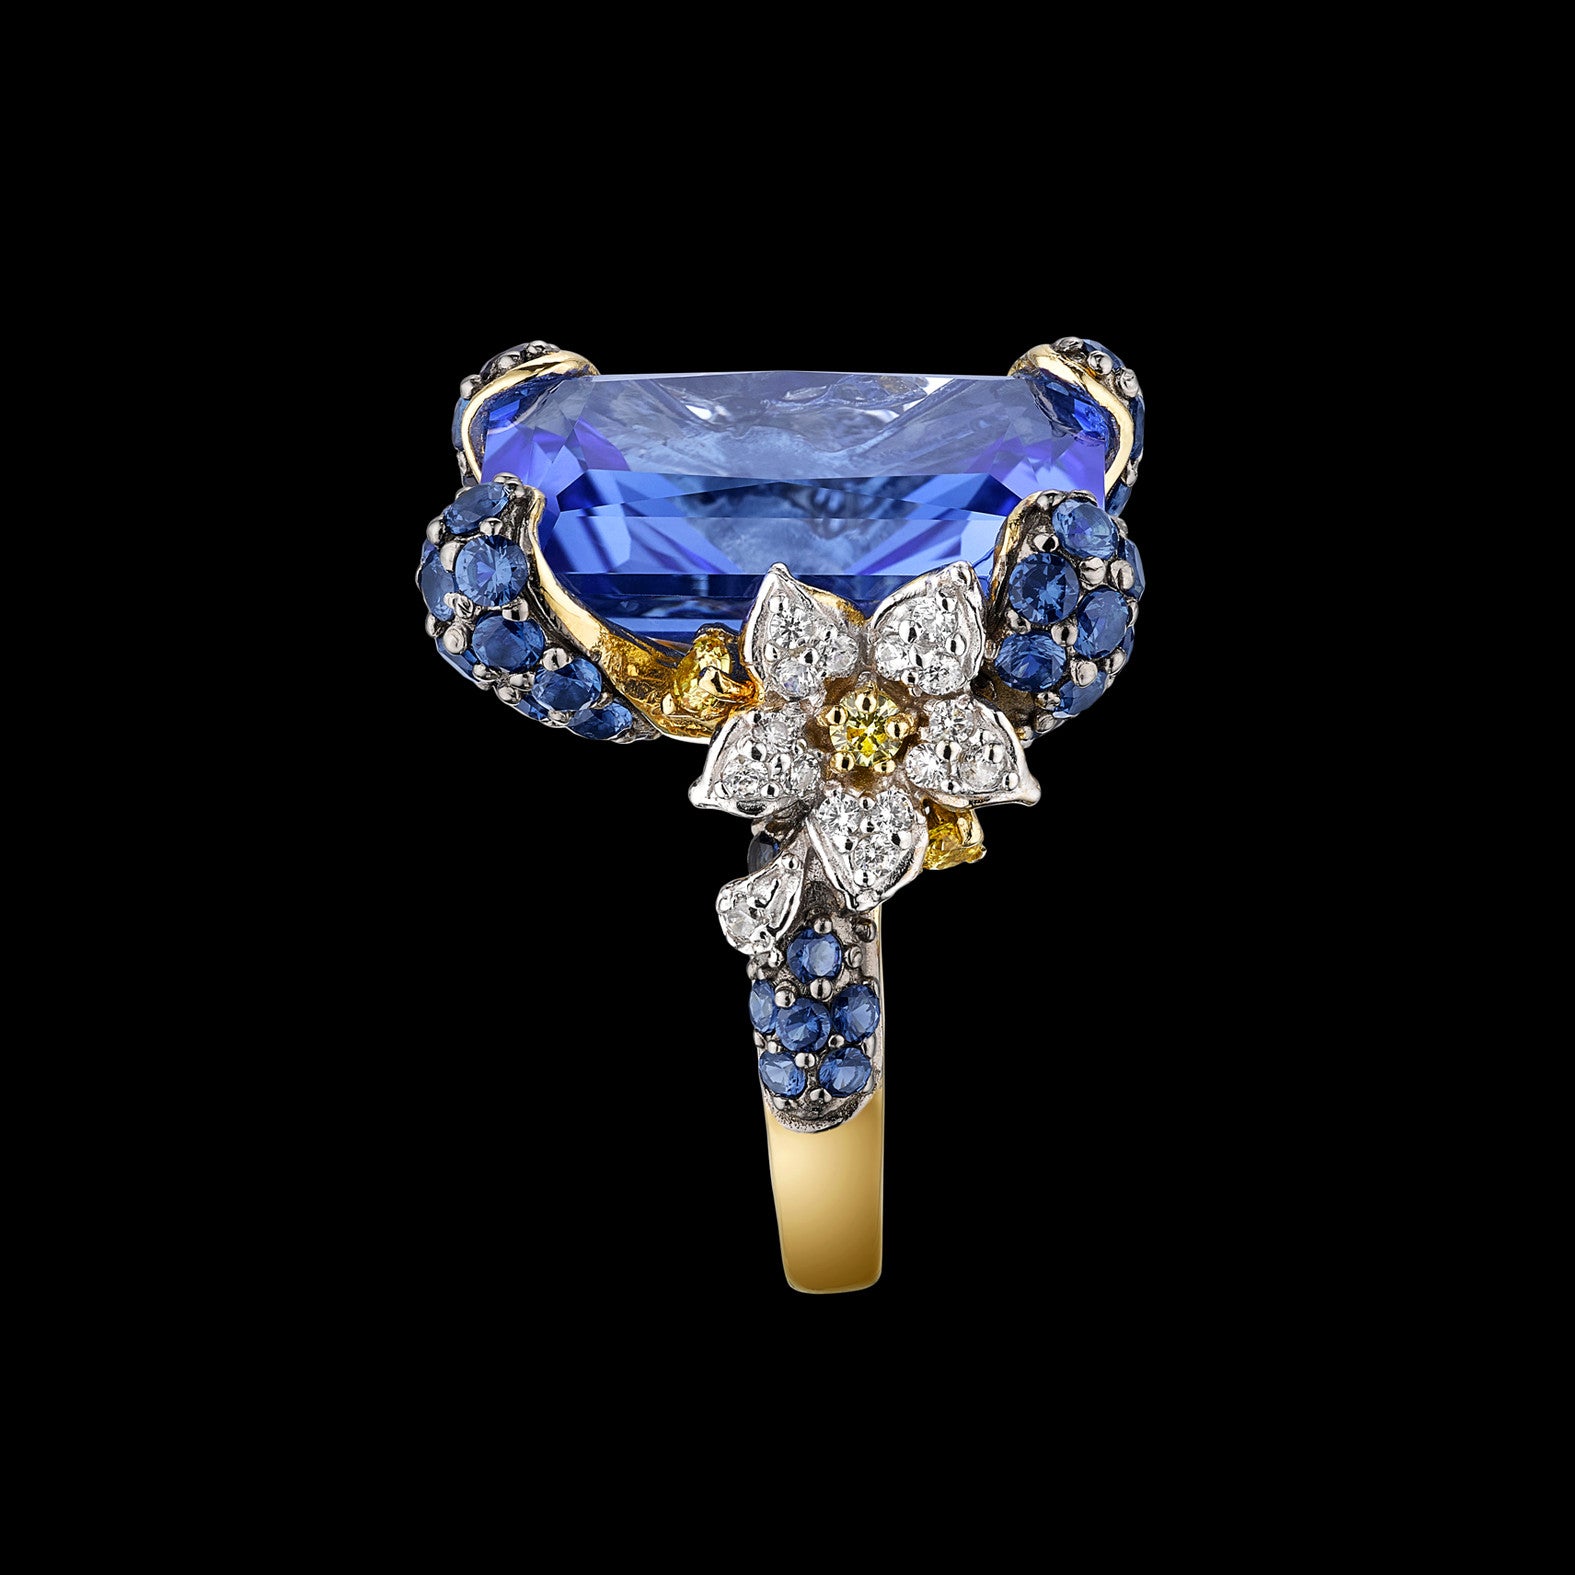 Blue Cinderella Ring, Ring, Anabela Chan Joaillerie - Fine jewelry with laboratory grown and created gemstones hand-crafted in the United Kingdom. Anabela Chan Joaillerie is the first fine jewellery brand in the world to champion laboratory-grown and created gemstones with high jewellery design, artisanal craftsmanship and a focus on ethical and sustainable innovations.